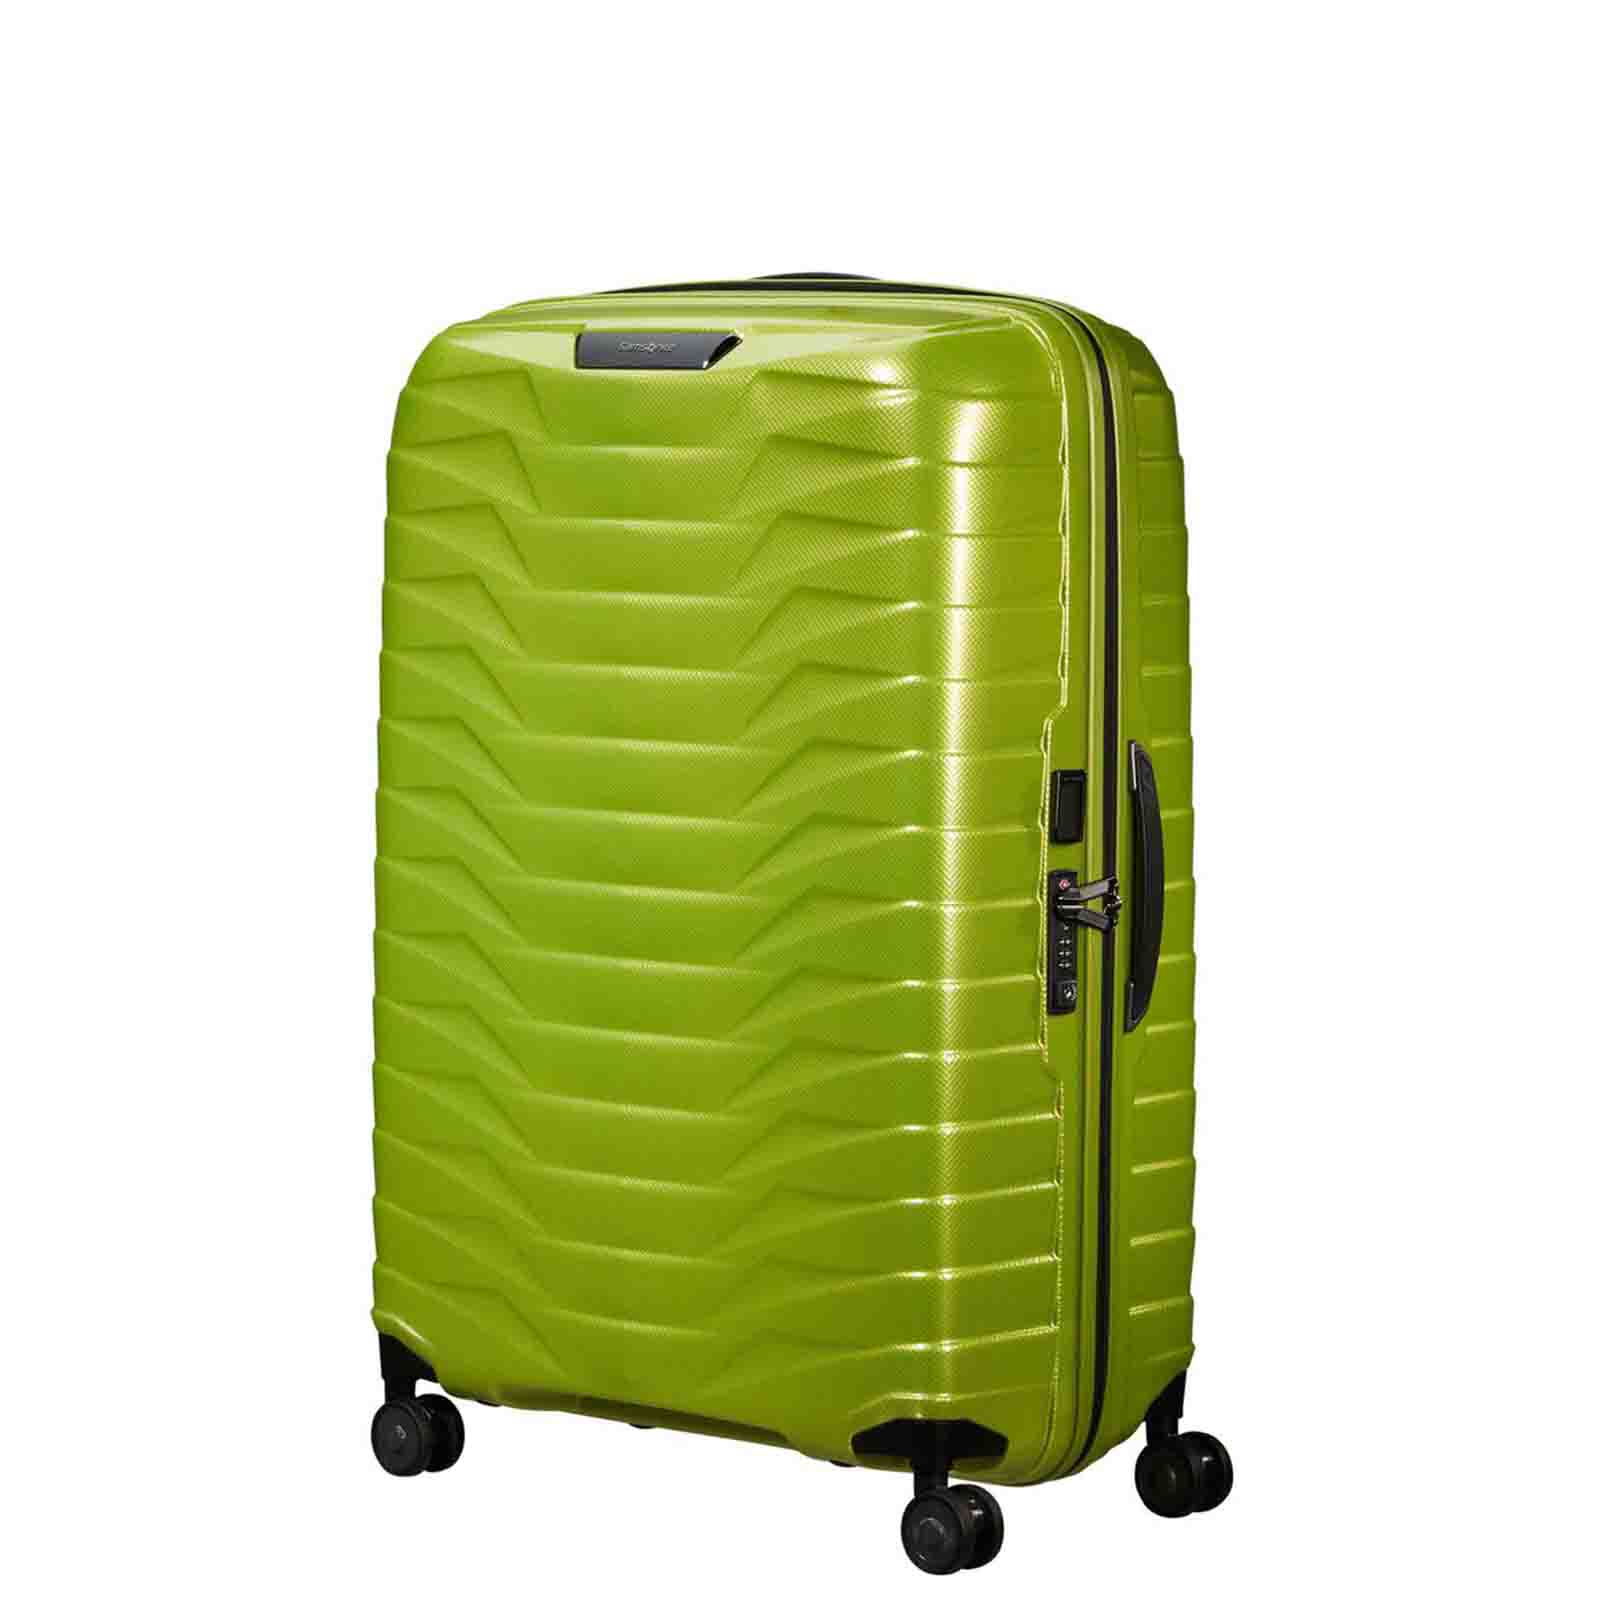 Samsonite-Proxis-81cm-Suitcase-Lime-Front-Angle